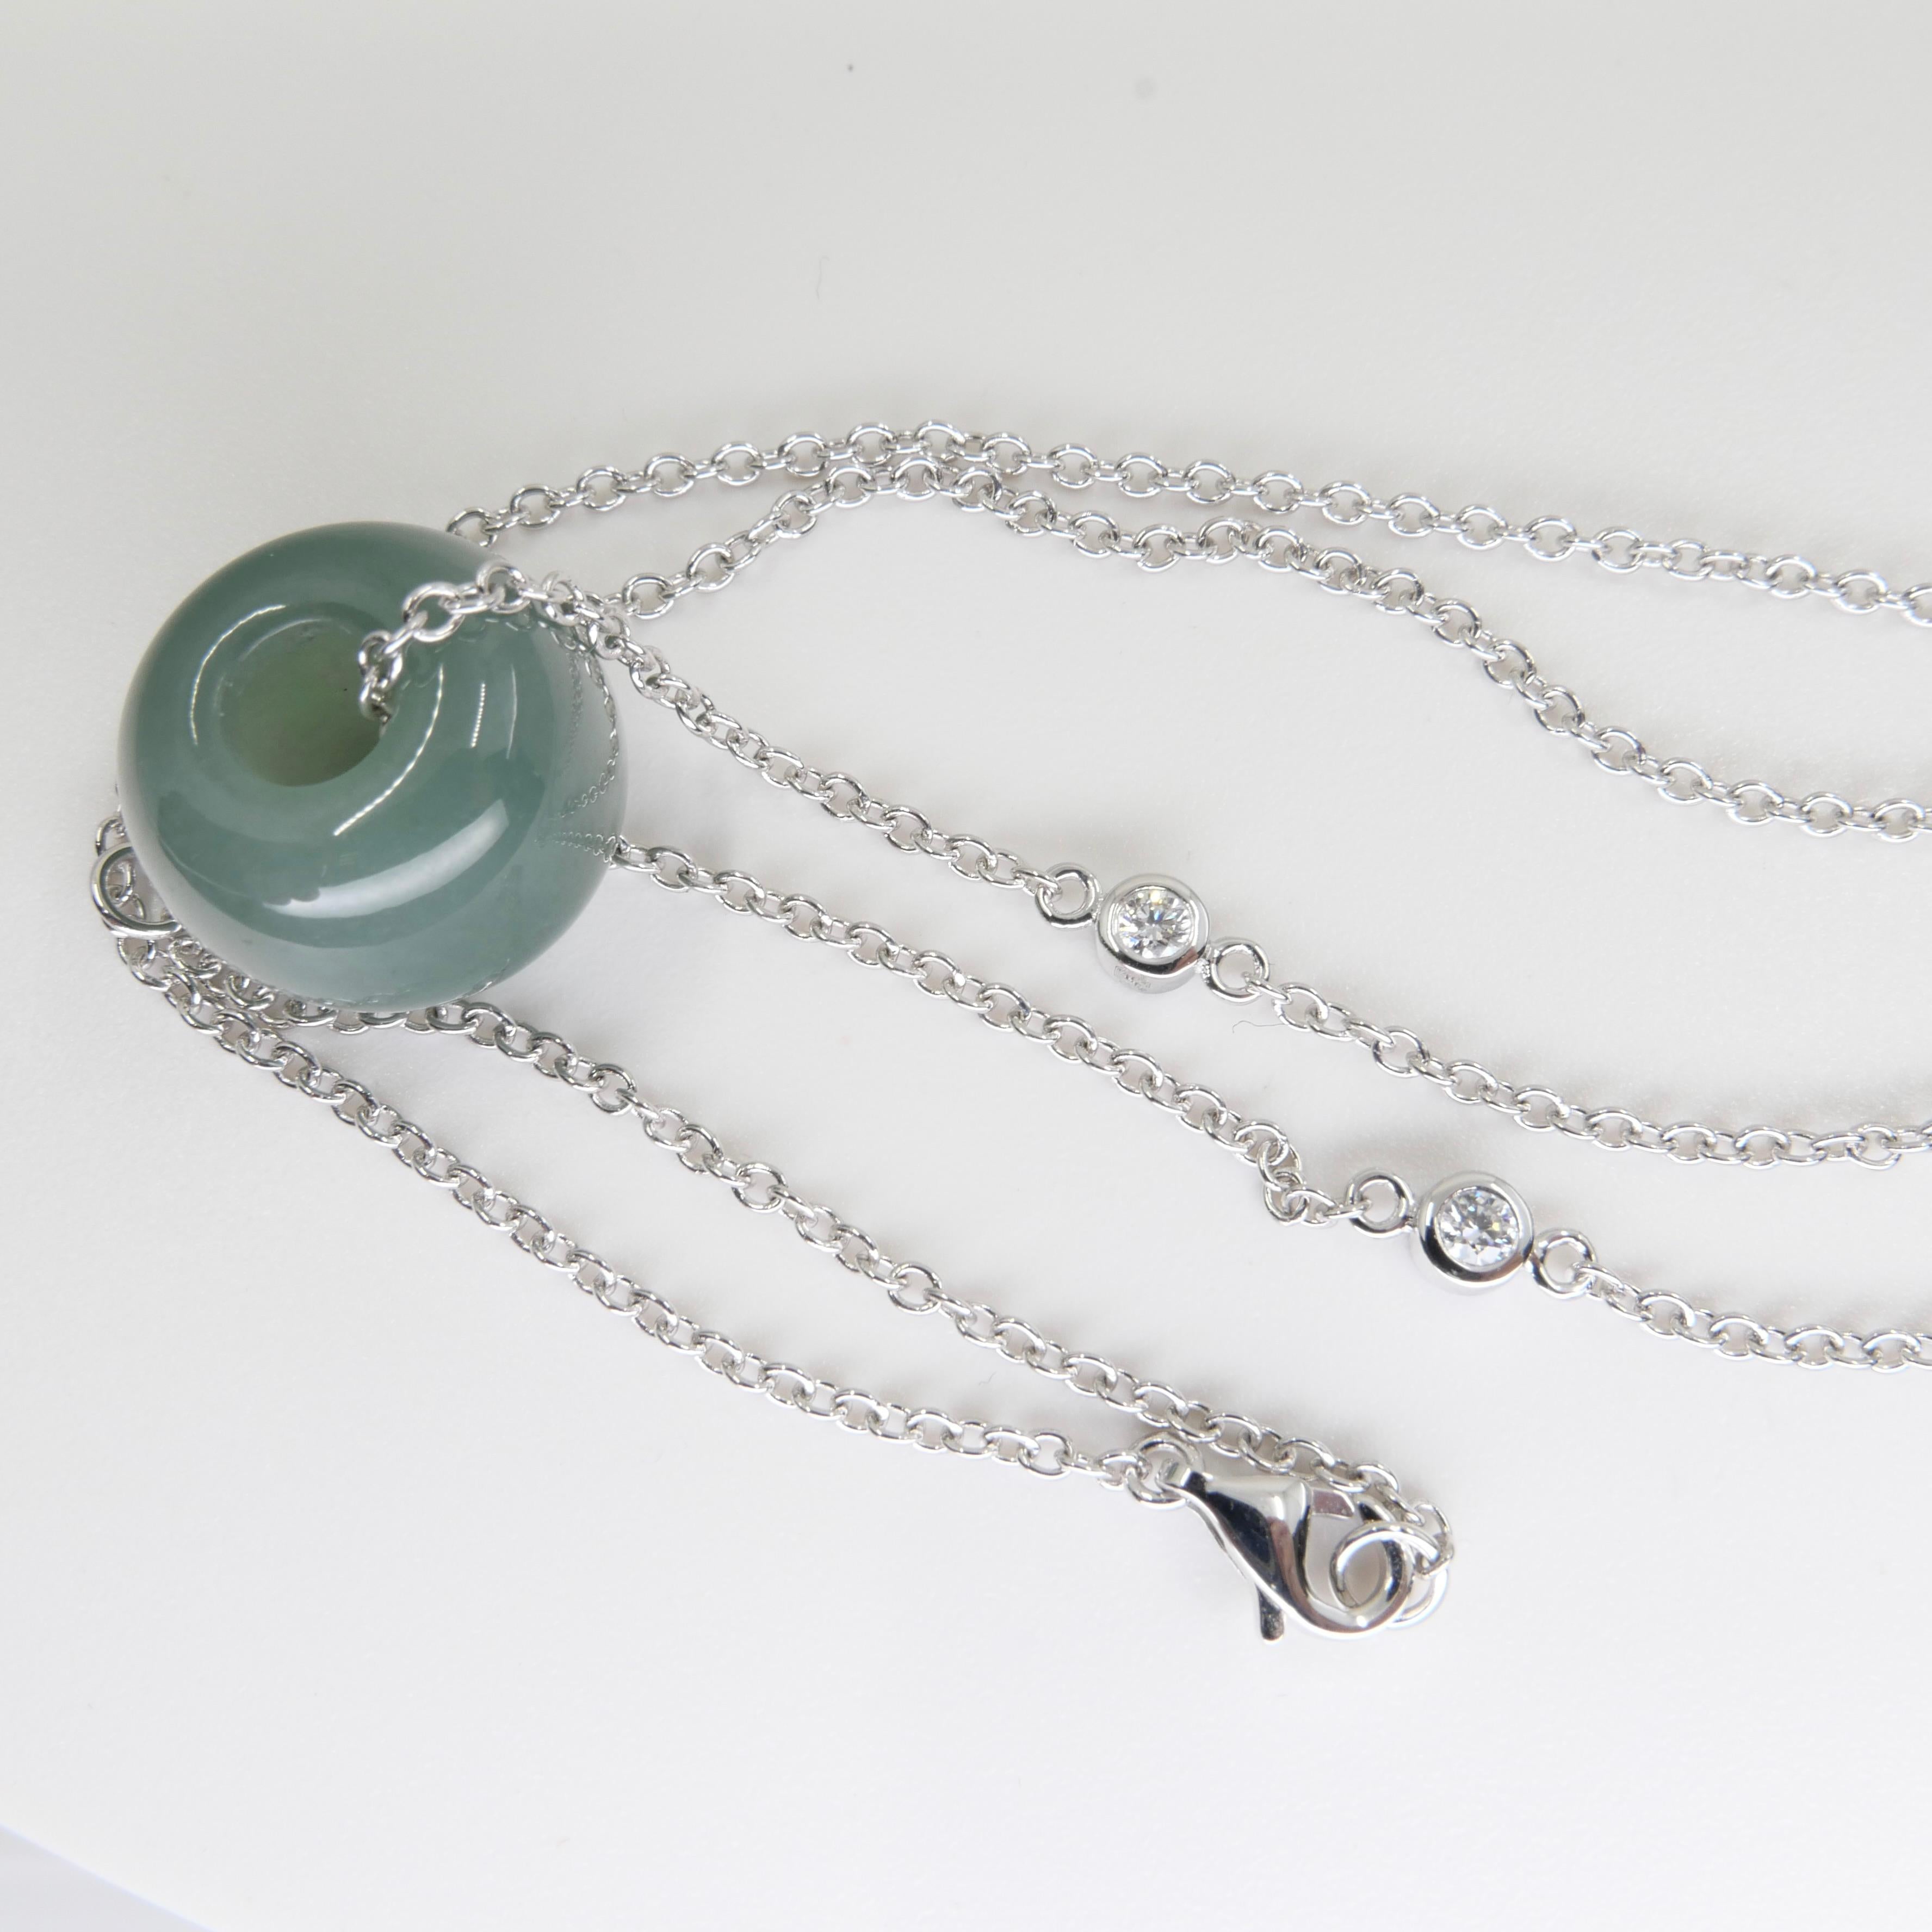 donut jade pendant meaning